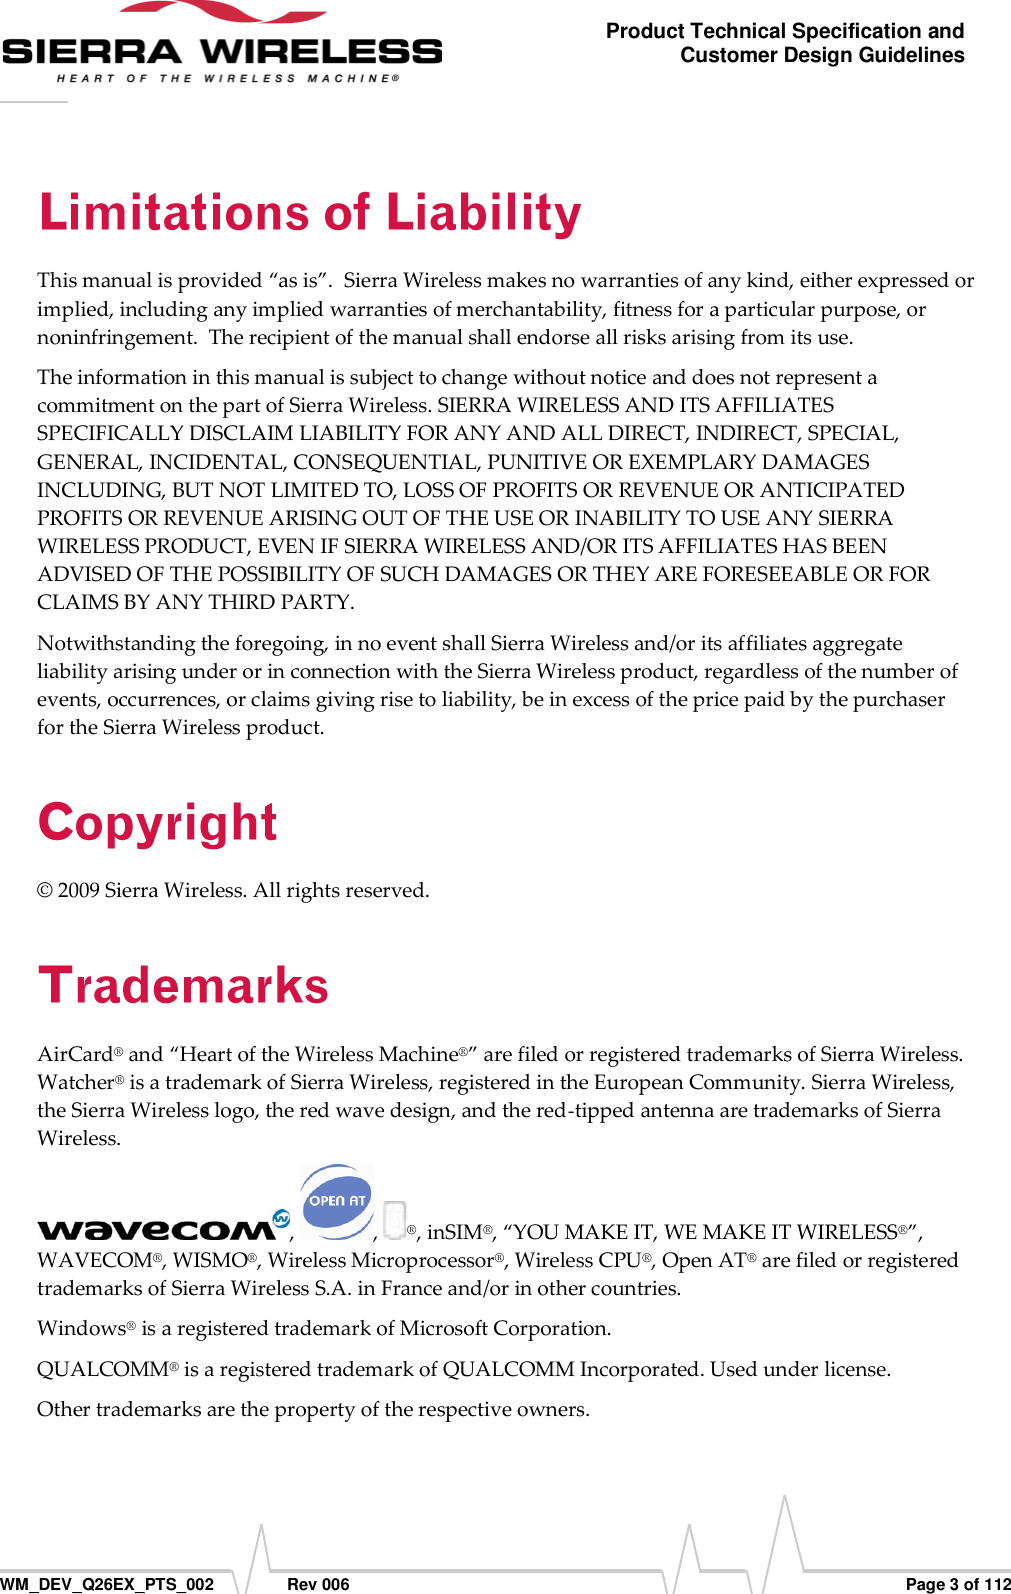      WM_DEV_Q26EX_PTS_002  Rev 006  Page 3 of 112 Product Technical Specification and Customer Design Guidelines This manual is provided “as is”.  Sierra Wireless makes no warranties of any kind, either expressed or implied, including any implied warranties of merchantability, fitness for a particular purpose, or noninfringement.  The recipient of the manual shall endorse all risks arising from its use.   The information in this manual is subject to change without notice and does not represent a commitment on the part of Sierra Wireless. SIERRA WIRELESS AND ITS AFFILIATES SPECIFICALLY DISCLAIM LIABILITY FOR ANY AND ALL DIRECT, INDIRECT, SPECIAL, GENERAL, INCIDENTAL, CONSEQUENTIAL, PUNITIVE OR EXEMPLARY DAMAGES INCLUDING, BUT NOT LIMITED TO, LOSS OF PROFITS OR REVENUE OR ANTICIPATED PROFITS OR REVENUE ARISING OUT OF THE USE OR INABILITY TO USE ANY SIERRA WIRELESS PRODUCT, EVEN IF SIERRA WIRELESS AND/OR ITS AFFILIATES HAS BEEN ADVISED OF THE POSSIBILITY OF SUCH DAMAGES OR THEY ARE FORESEEABLE OR FOR CLAIMS BY ANY THIRD PARTY. Notwithstanding the foregoing, in no event shall Sierra Wireless and/or its affiliates aggregate liability arising under or in connection with the Sierra Wireless product, regardless of the number of events, occurrences, or claims giving rise to liability, be in excess of the price paid by the purchaser for the Sierra Wireless product. © 2009 Sierra Wireless. All rights reserved. AirCard® and “Heart of the Wireless Machine®” are filed or registered trademarks of Sierra Wireless. Watcher® is a trademark of Sierra Wireless, registered in the European Community. Sierra Wireless, the Sierra Wireless logo, the red wave design, and the red-tipped antenna are trademarks of Sierra Wireless. ,  ,  ®, inSIM®, “YOU MAKE IT, WE MAKE IT WIRELESS®”, WAVECOM®, WISMO®, Wireless Microprocessor®, Wireless CPU®, Open AT® are filed or registered trademarks of Sierra Wireless S.A. in France and/or in other countries. Windows® is a registered trademark of Microsoft Corporation.  QUALCOMM® is a registered trademark of QUALCOMM Incorporated. Used under license.  Other trademarks are the property of the respective owners. 